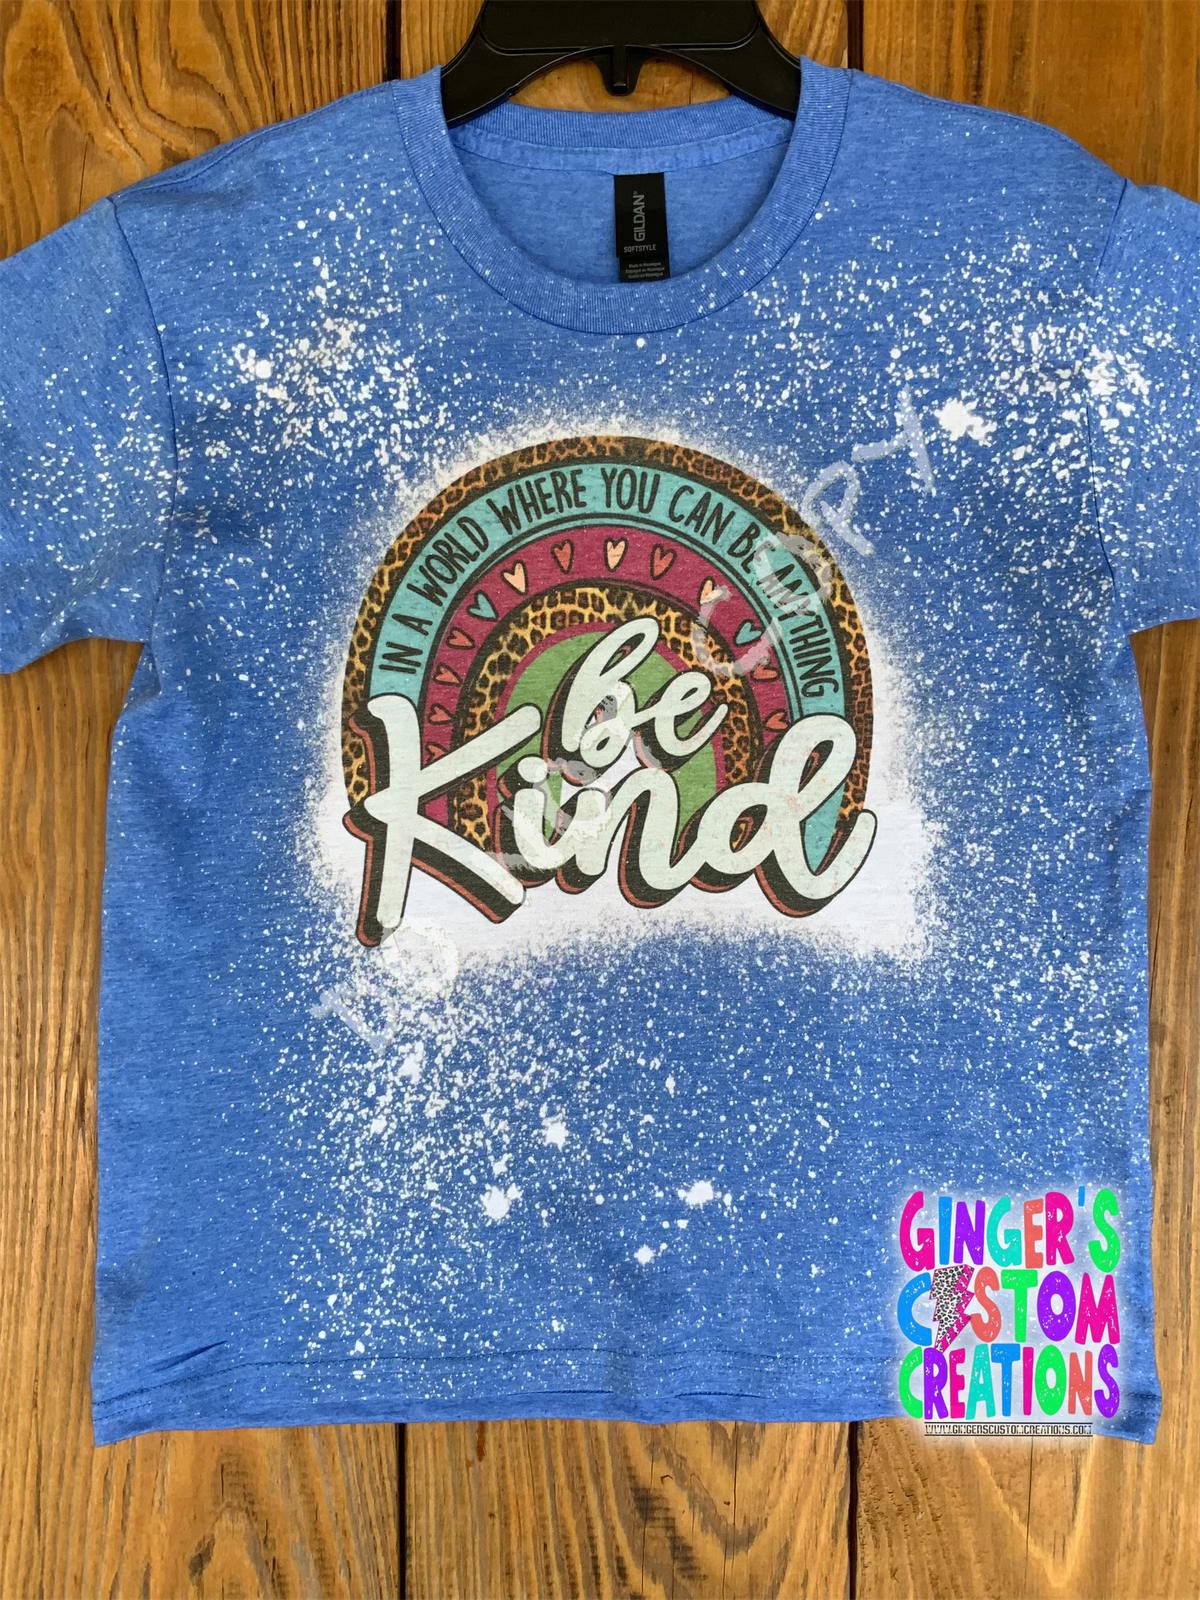 IN A WORLD WHERE YOU CAN BE ANYTHING BE KIND RAINBOW - BLEACHED TSHIRT